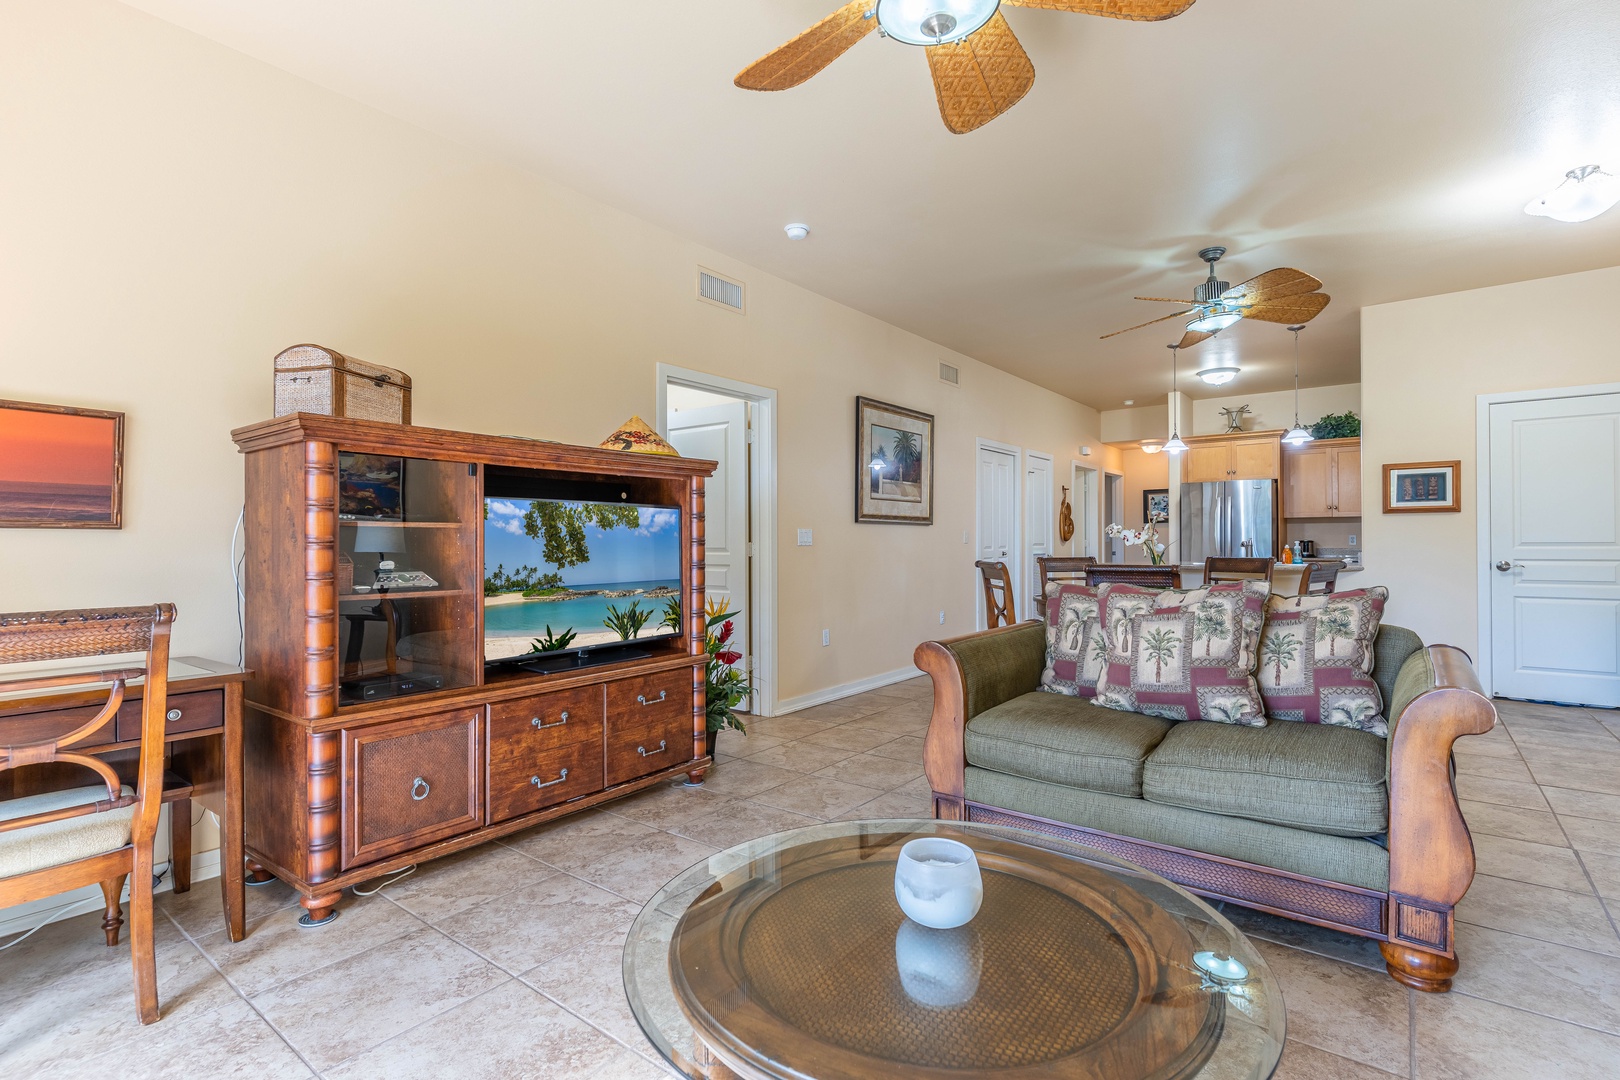 Kapolei Vacation Rentals, Kai Lani 8B - Sink into the plush seating in the living area surrounded by natural wood tones.